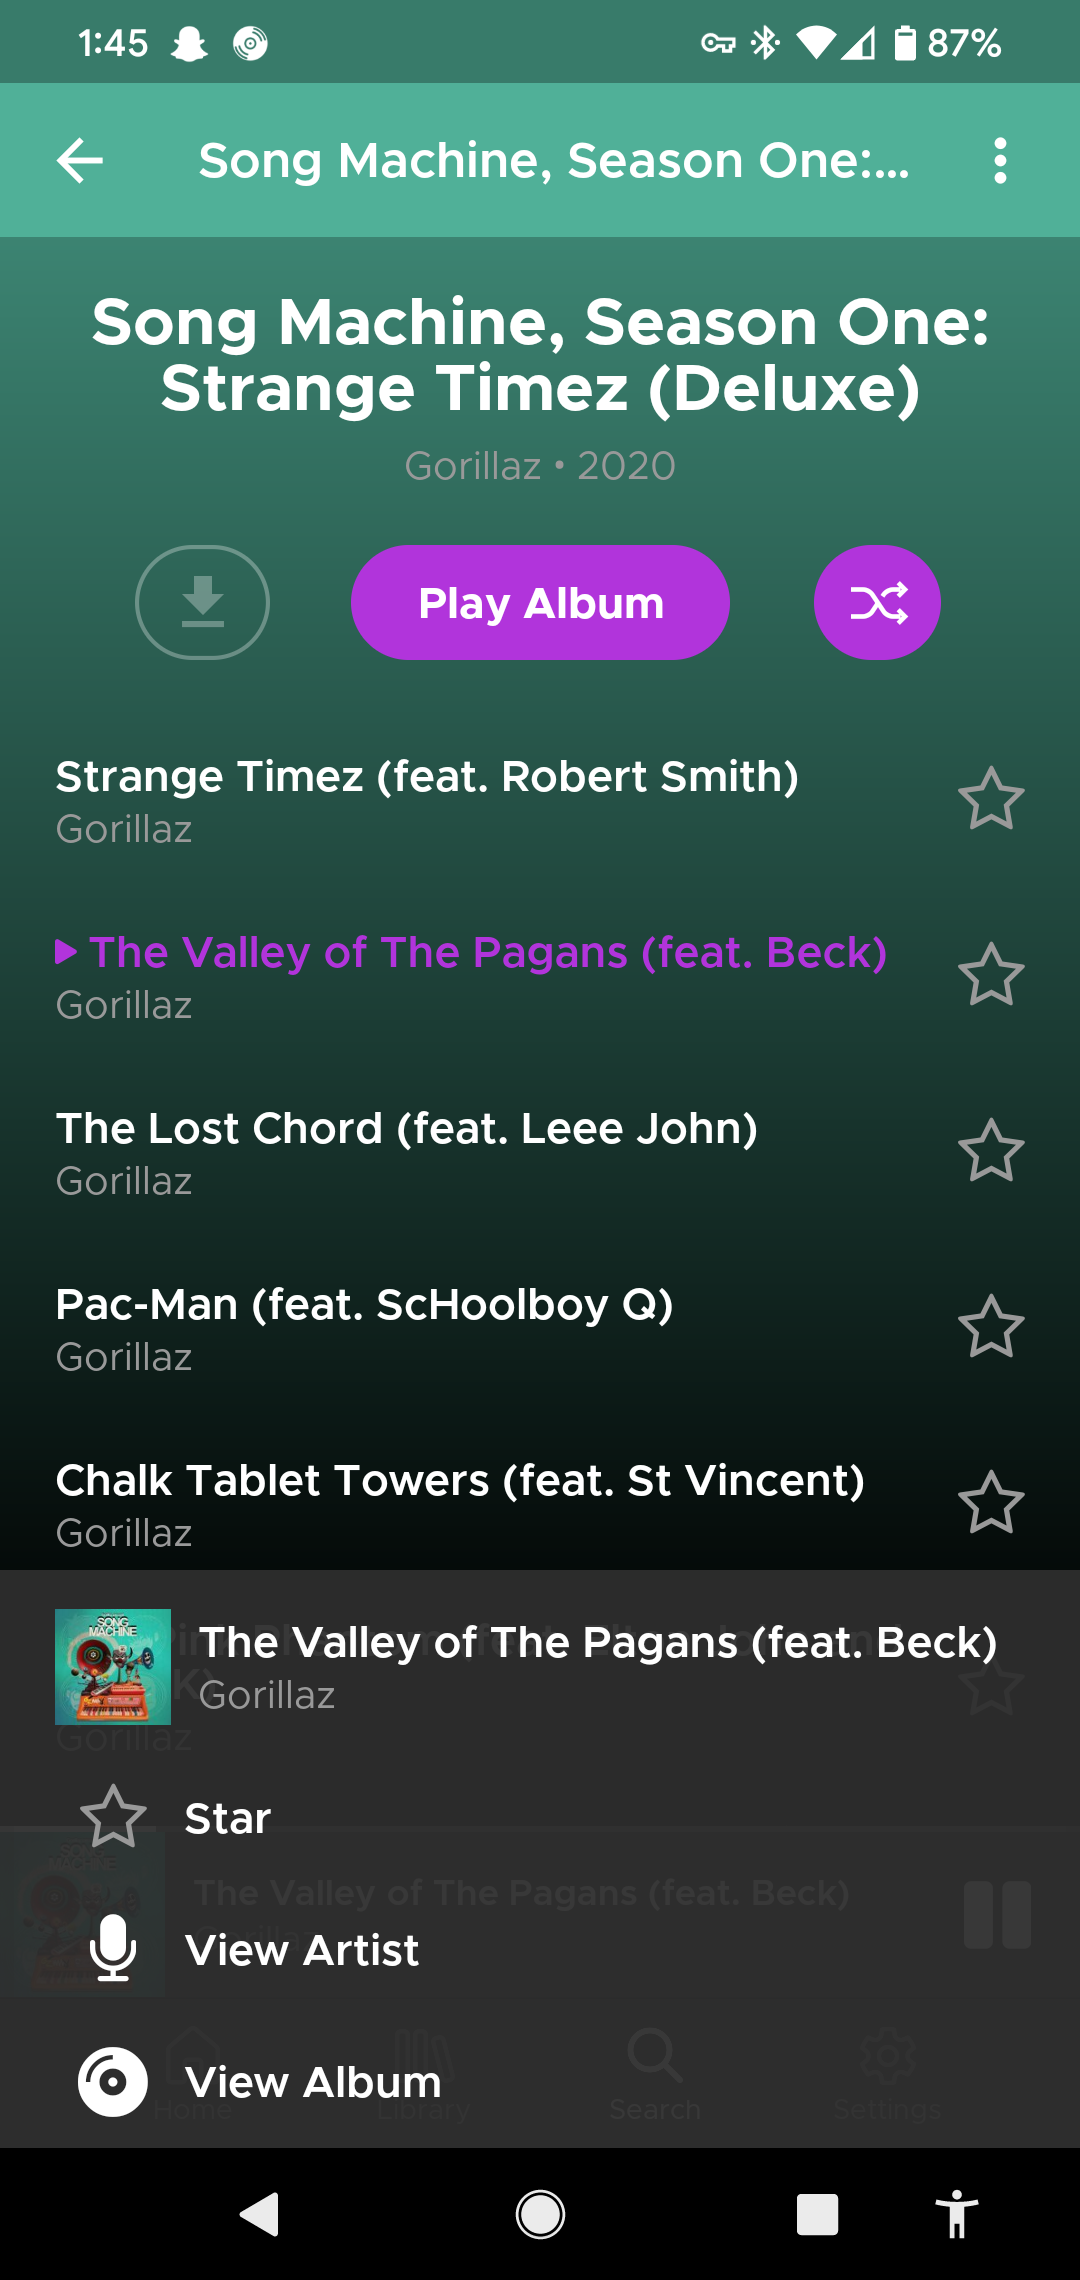 The context menu on mobile for a track.